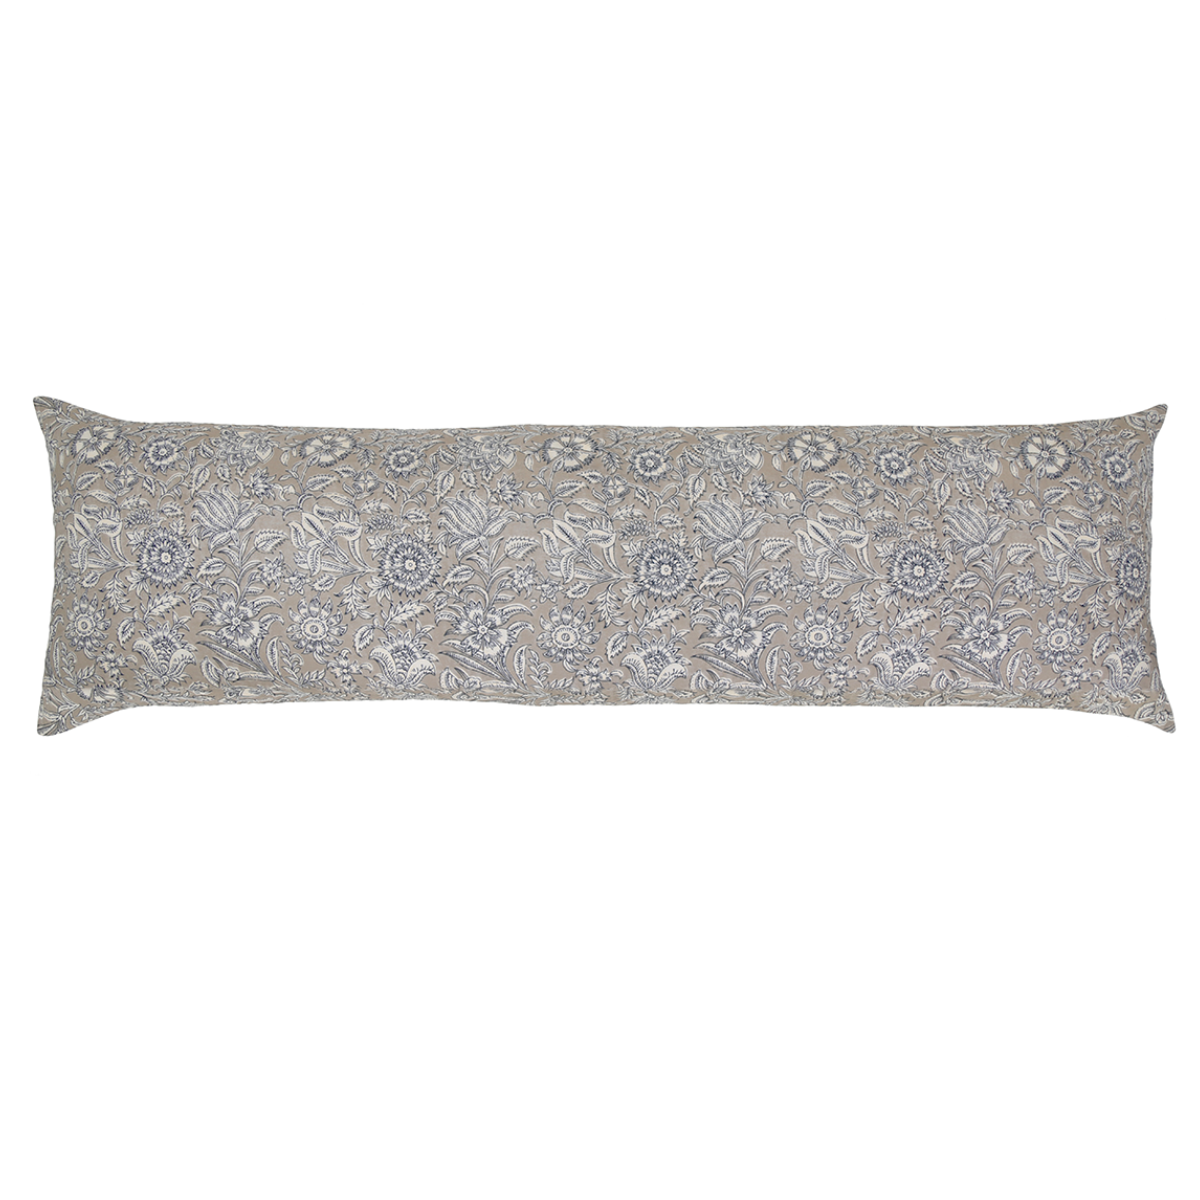 We love the fun design on this Brighton Body Pillow with Insert by Pom Pom at Home. This features a navy paisley print on a natural background with shell button closures and is made of 55% linen and 45% cotton.